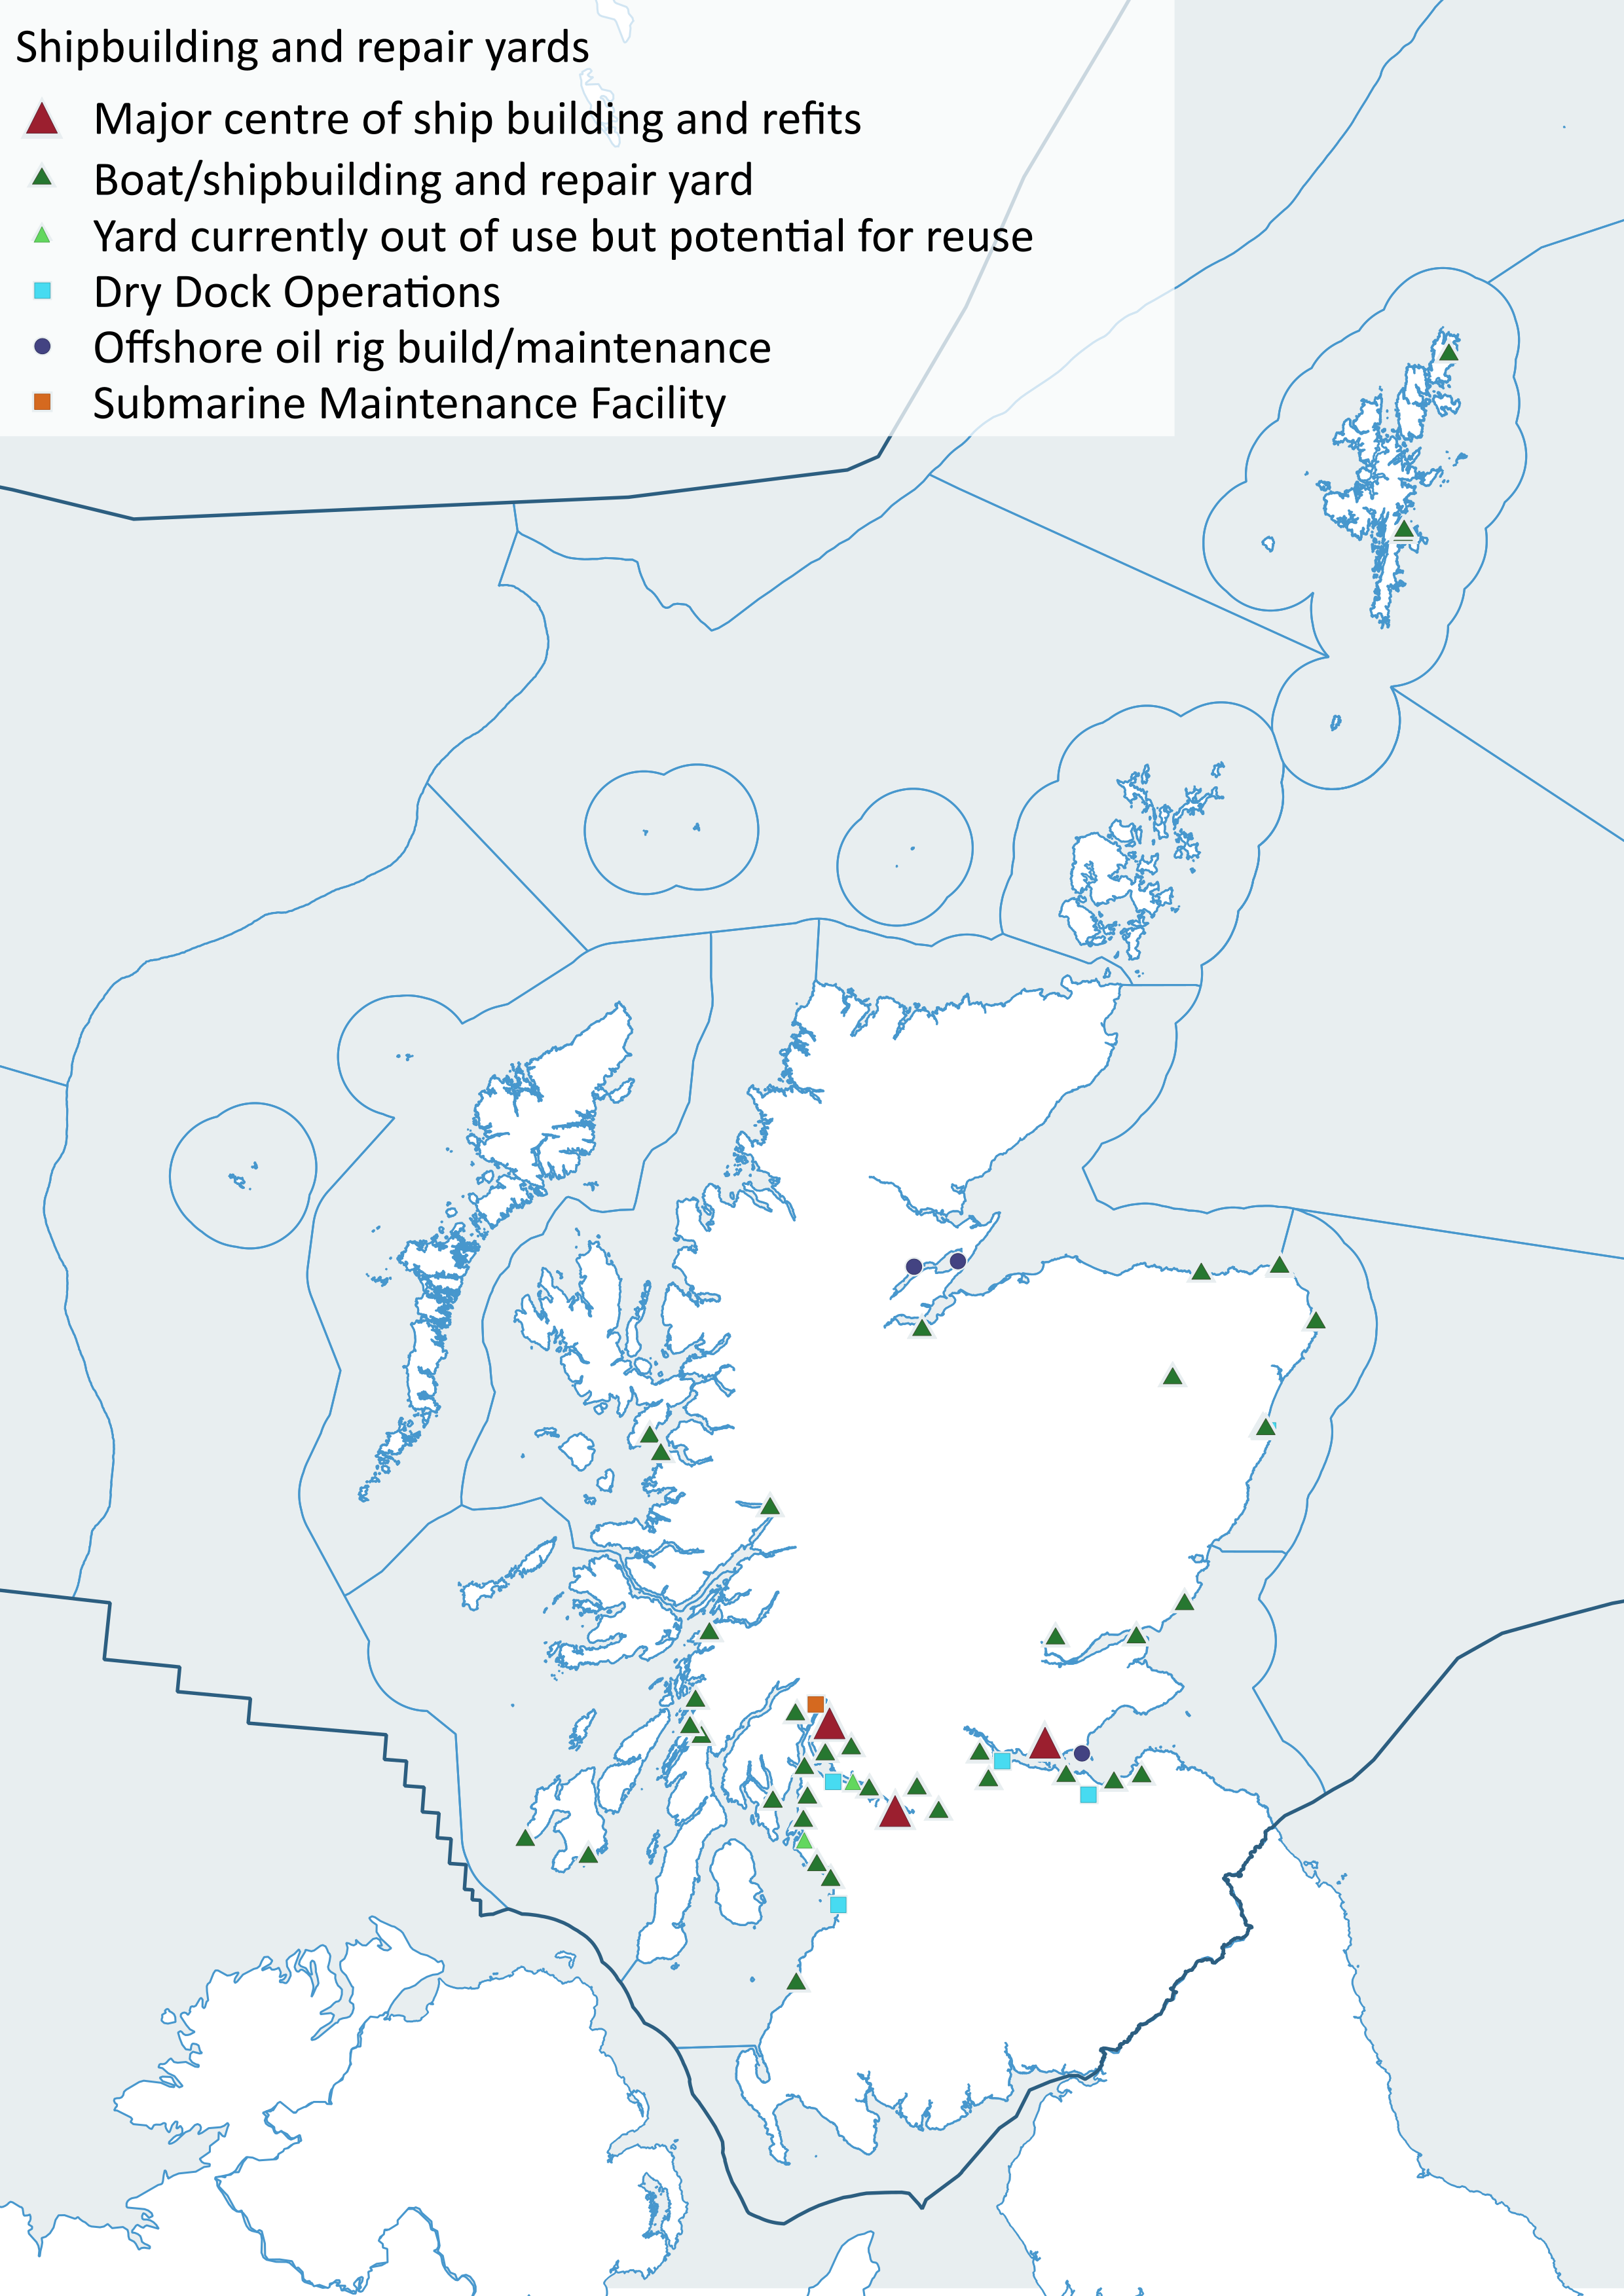 Source: Scottish Maritime Cluster. Note: the land based data point is a small repair yard base.